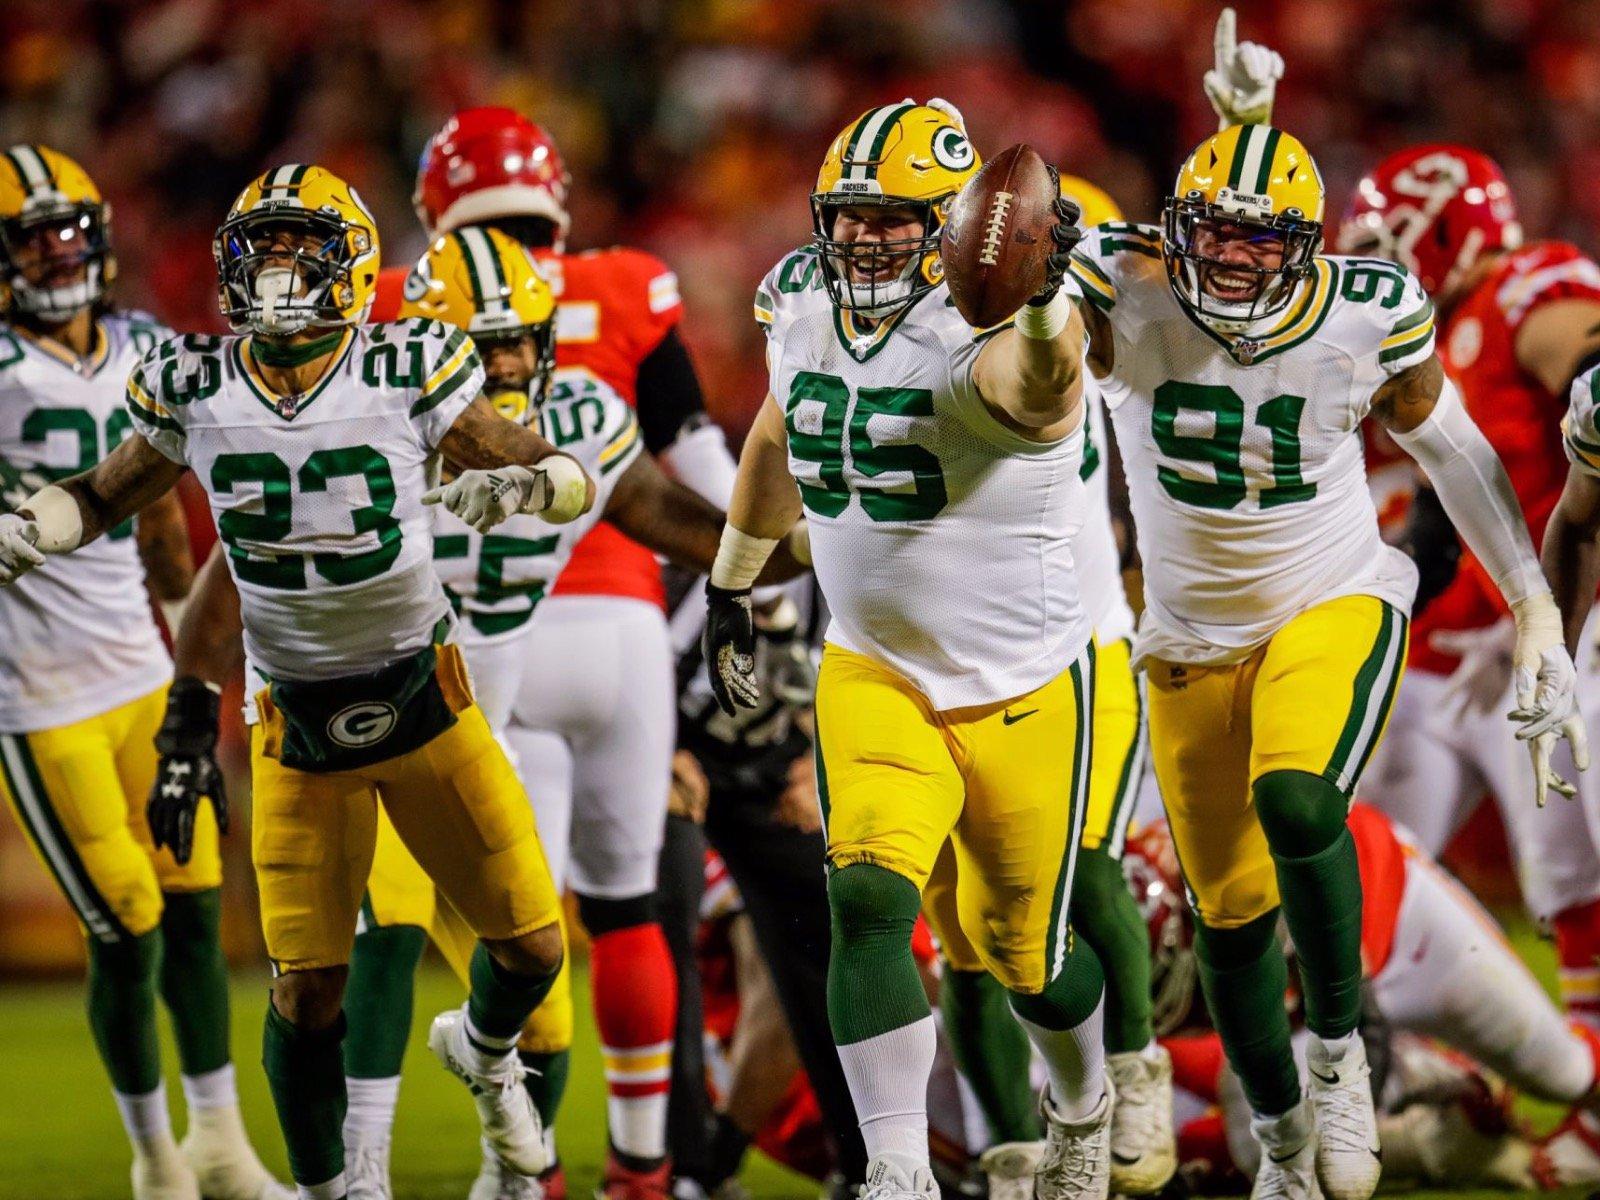 glorious image from the Packers' glorious Sunday night